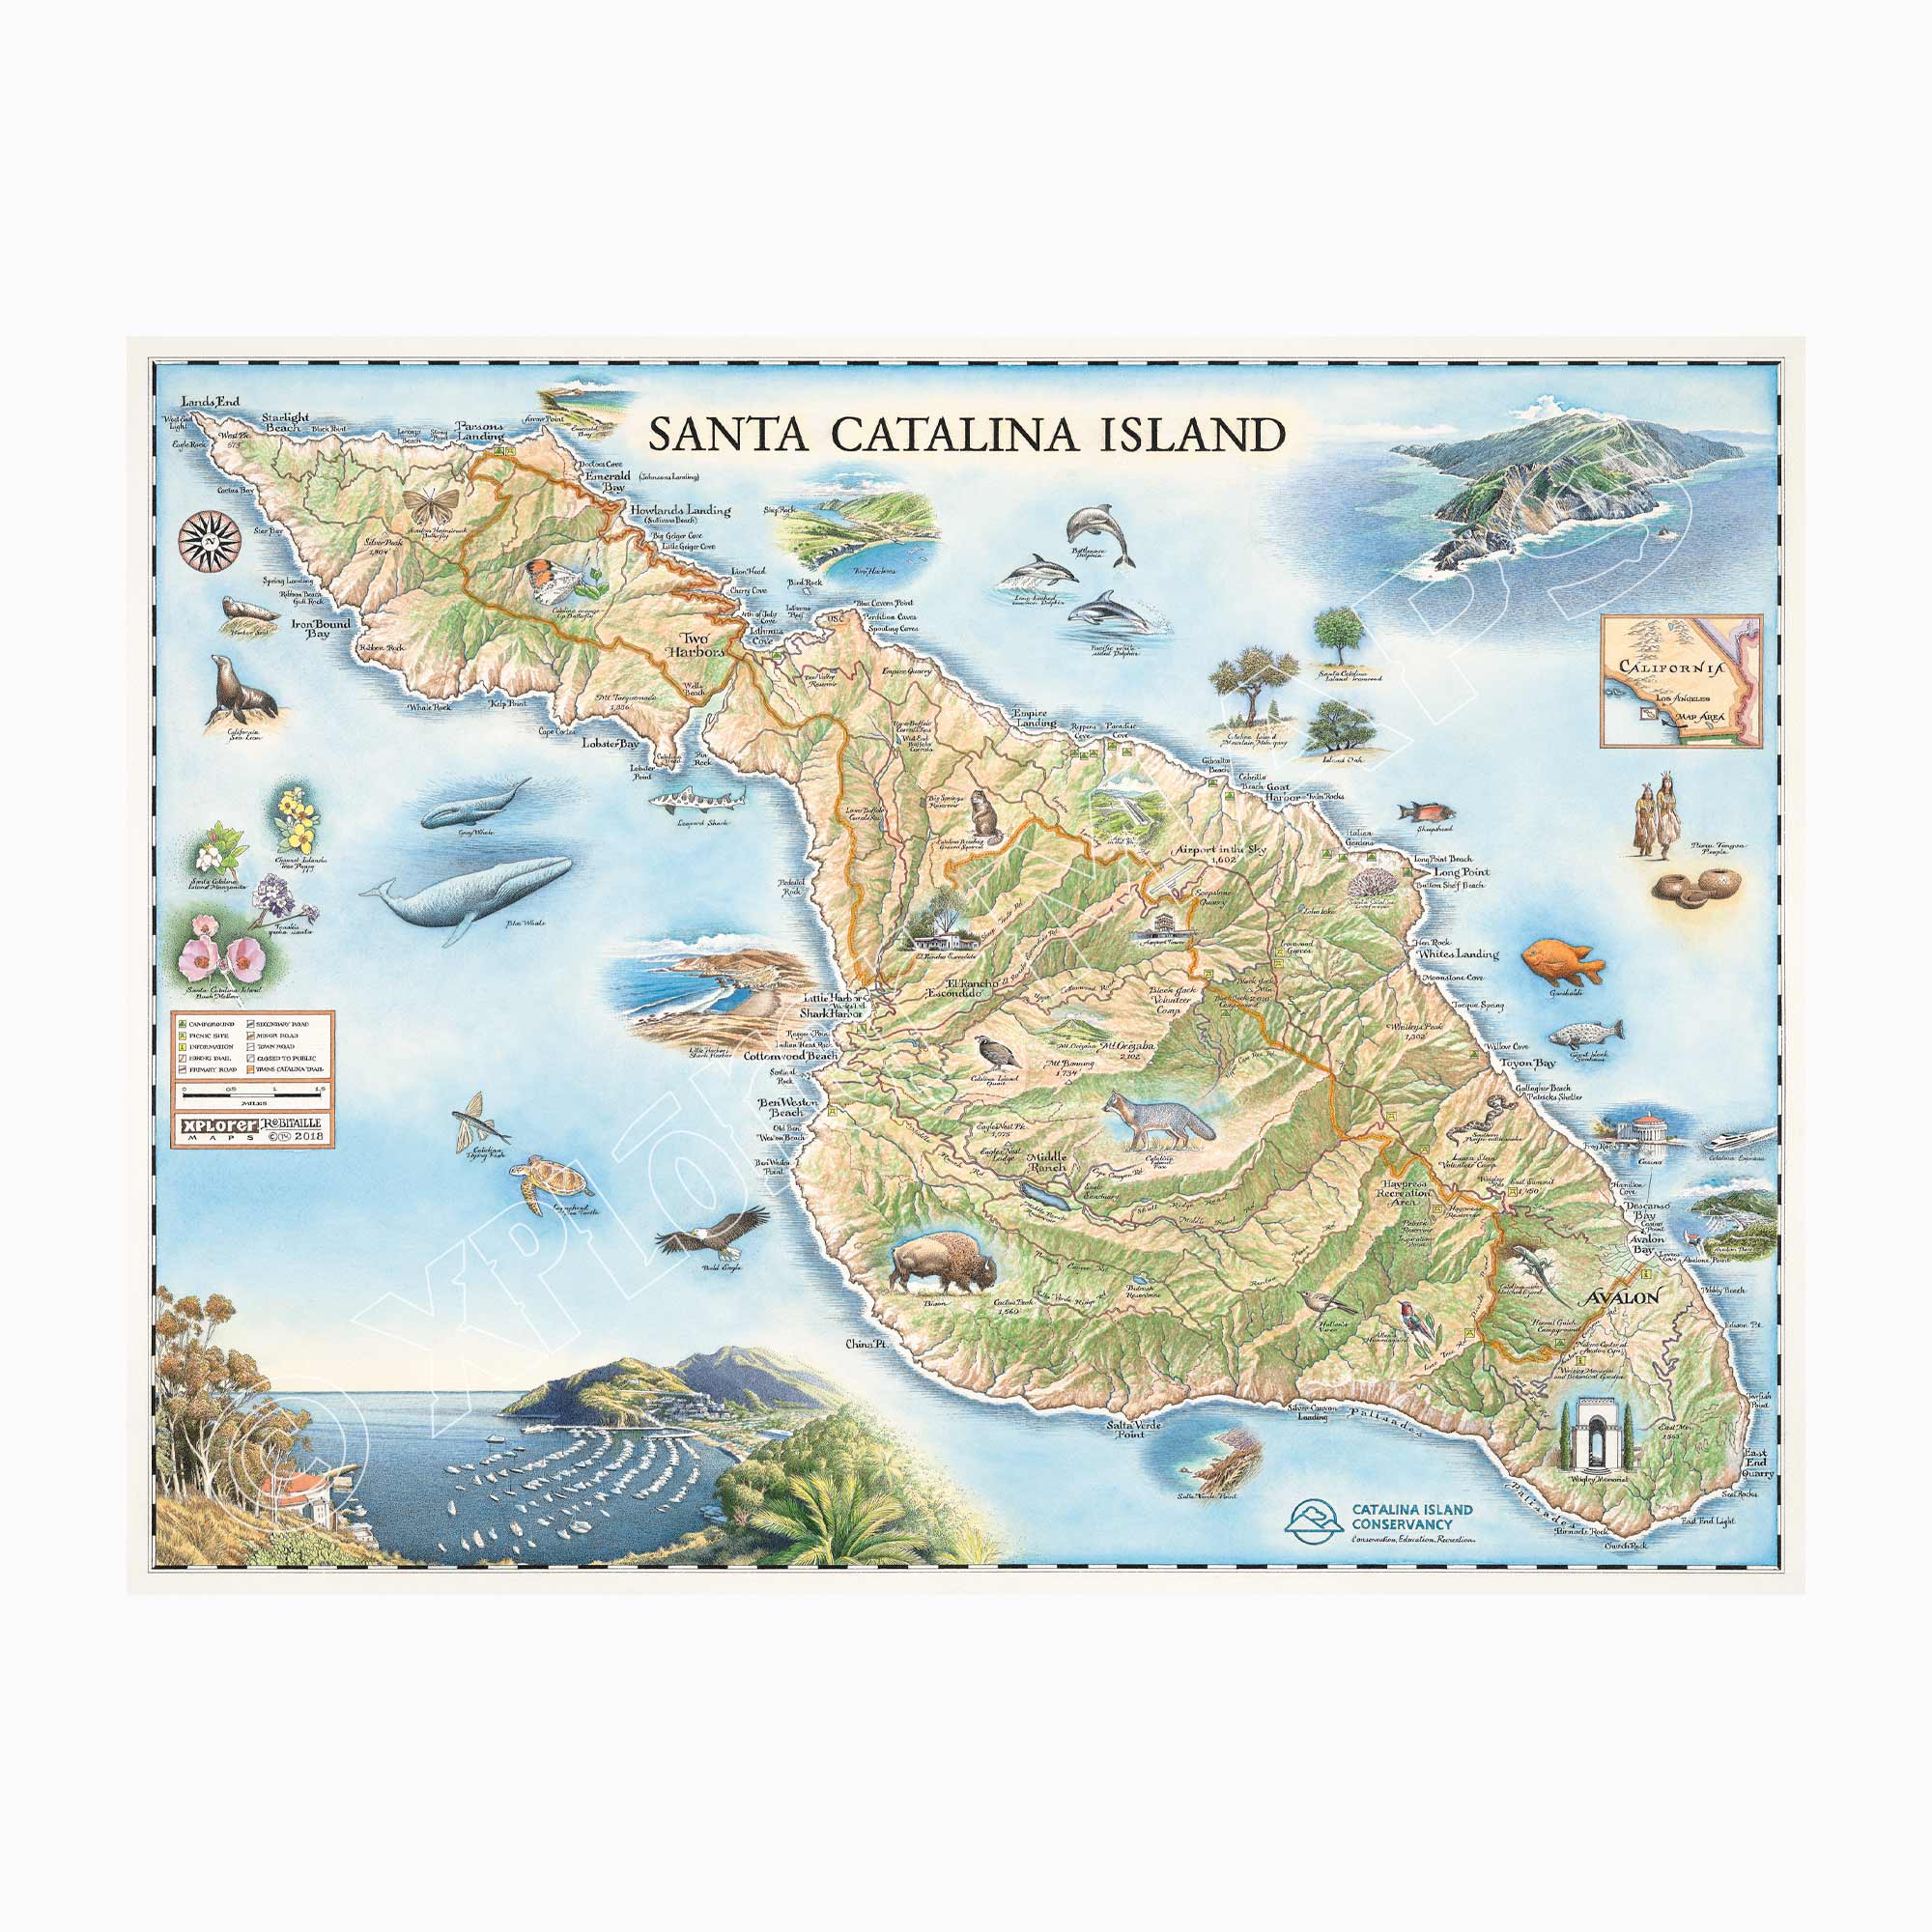 Santa Catalina Island hand-drawn map in blue and green. Located off the coast of California. The map features illustrations of places such as Wrigley Memorial, El Rancho Escondido, and Avalon Bay. Flora and fauna include Bison, Catalina Island Fox, Catalina Orange Lip butterfly, Channel Islands tree poppy, and Island oak. Map measures 24x18.